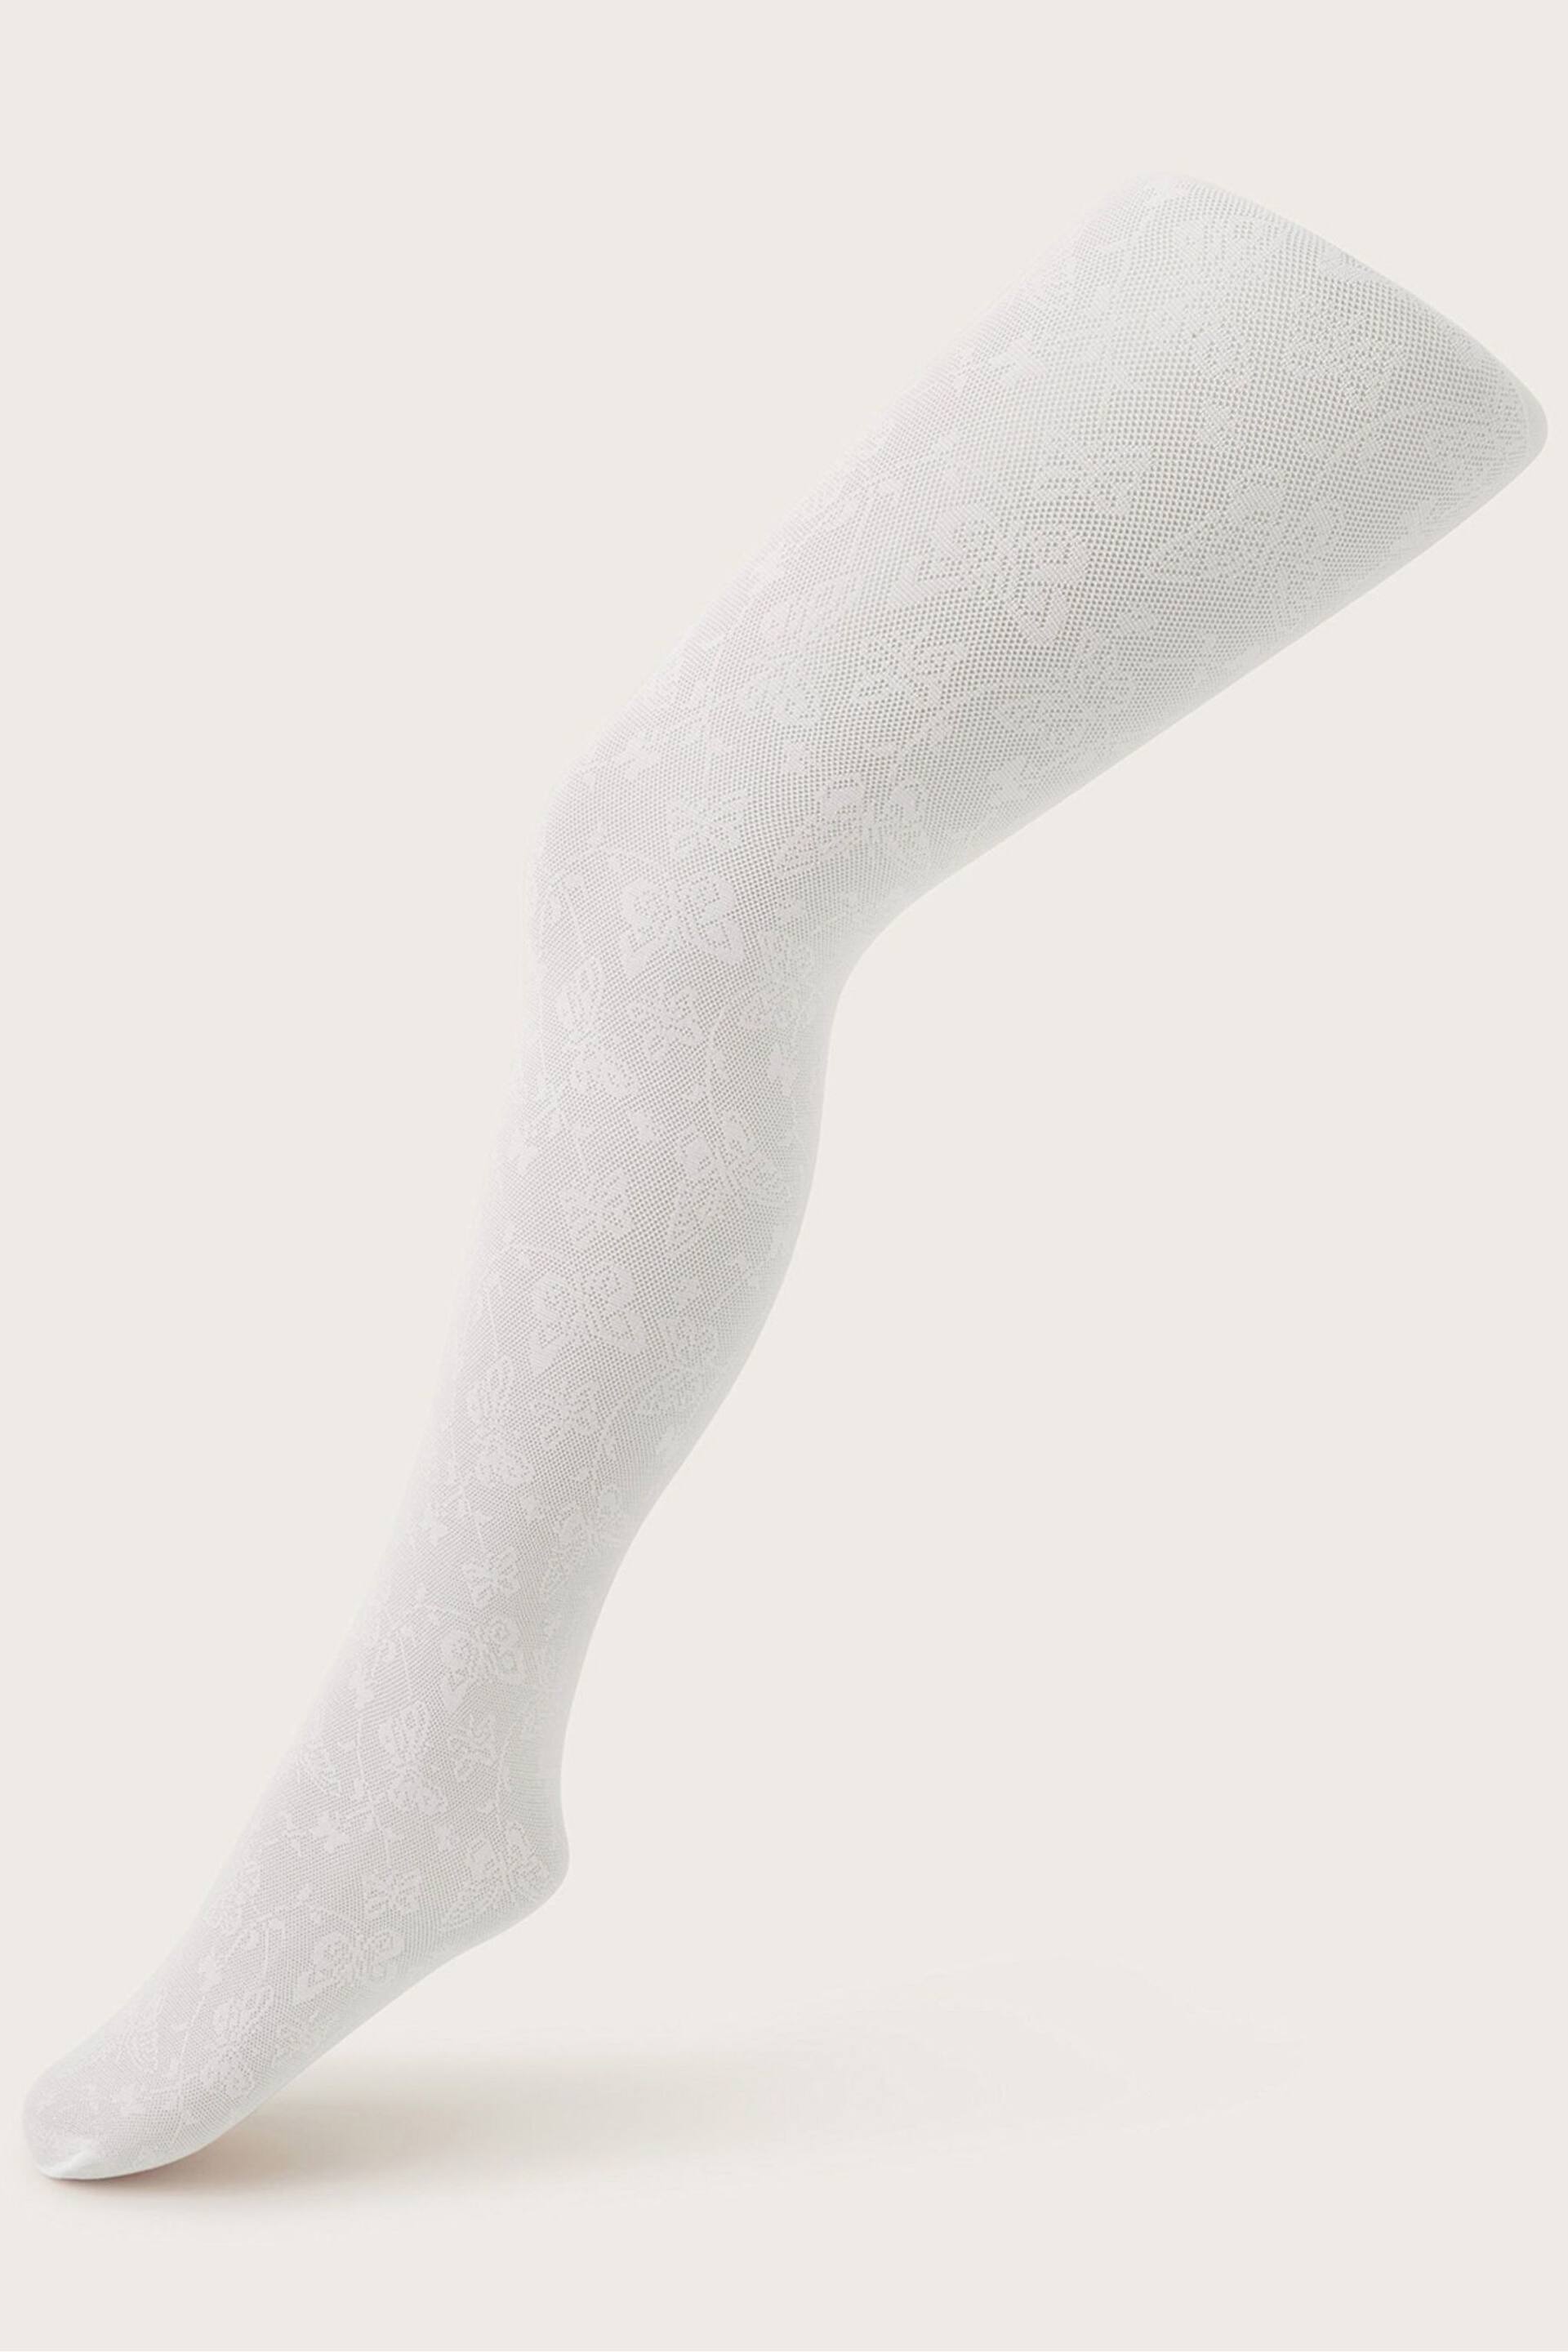 Monsoon White Butterfly Lace Tights - Image 1 of 2